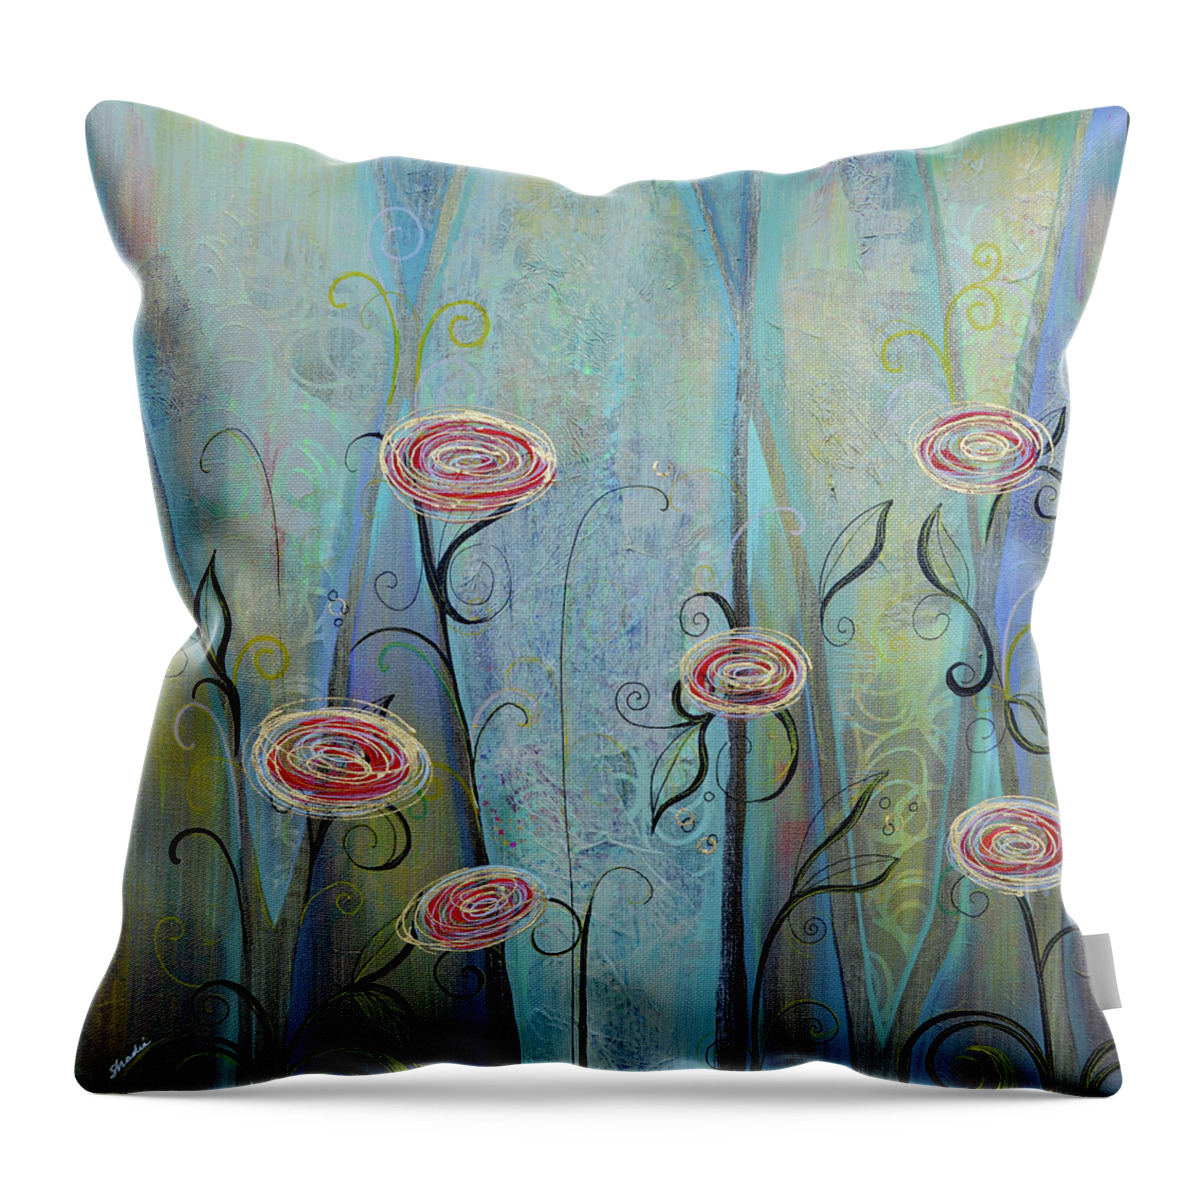 Gilded Throw Pillow featuring the painting Gilded Poppies I by Shadia Derbyshire